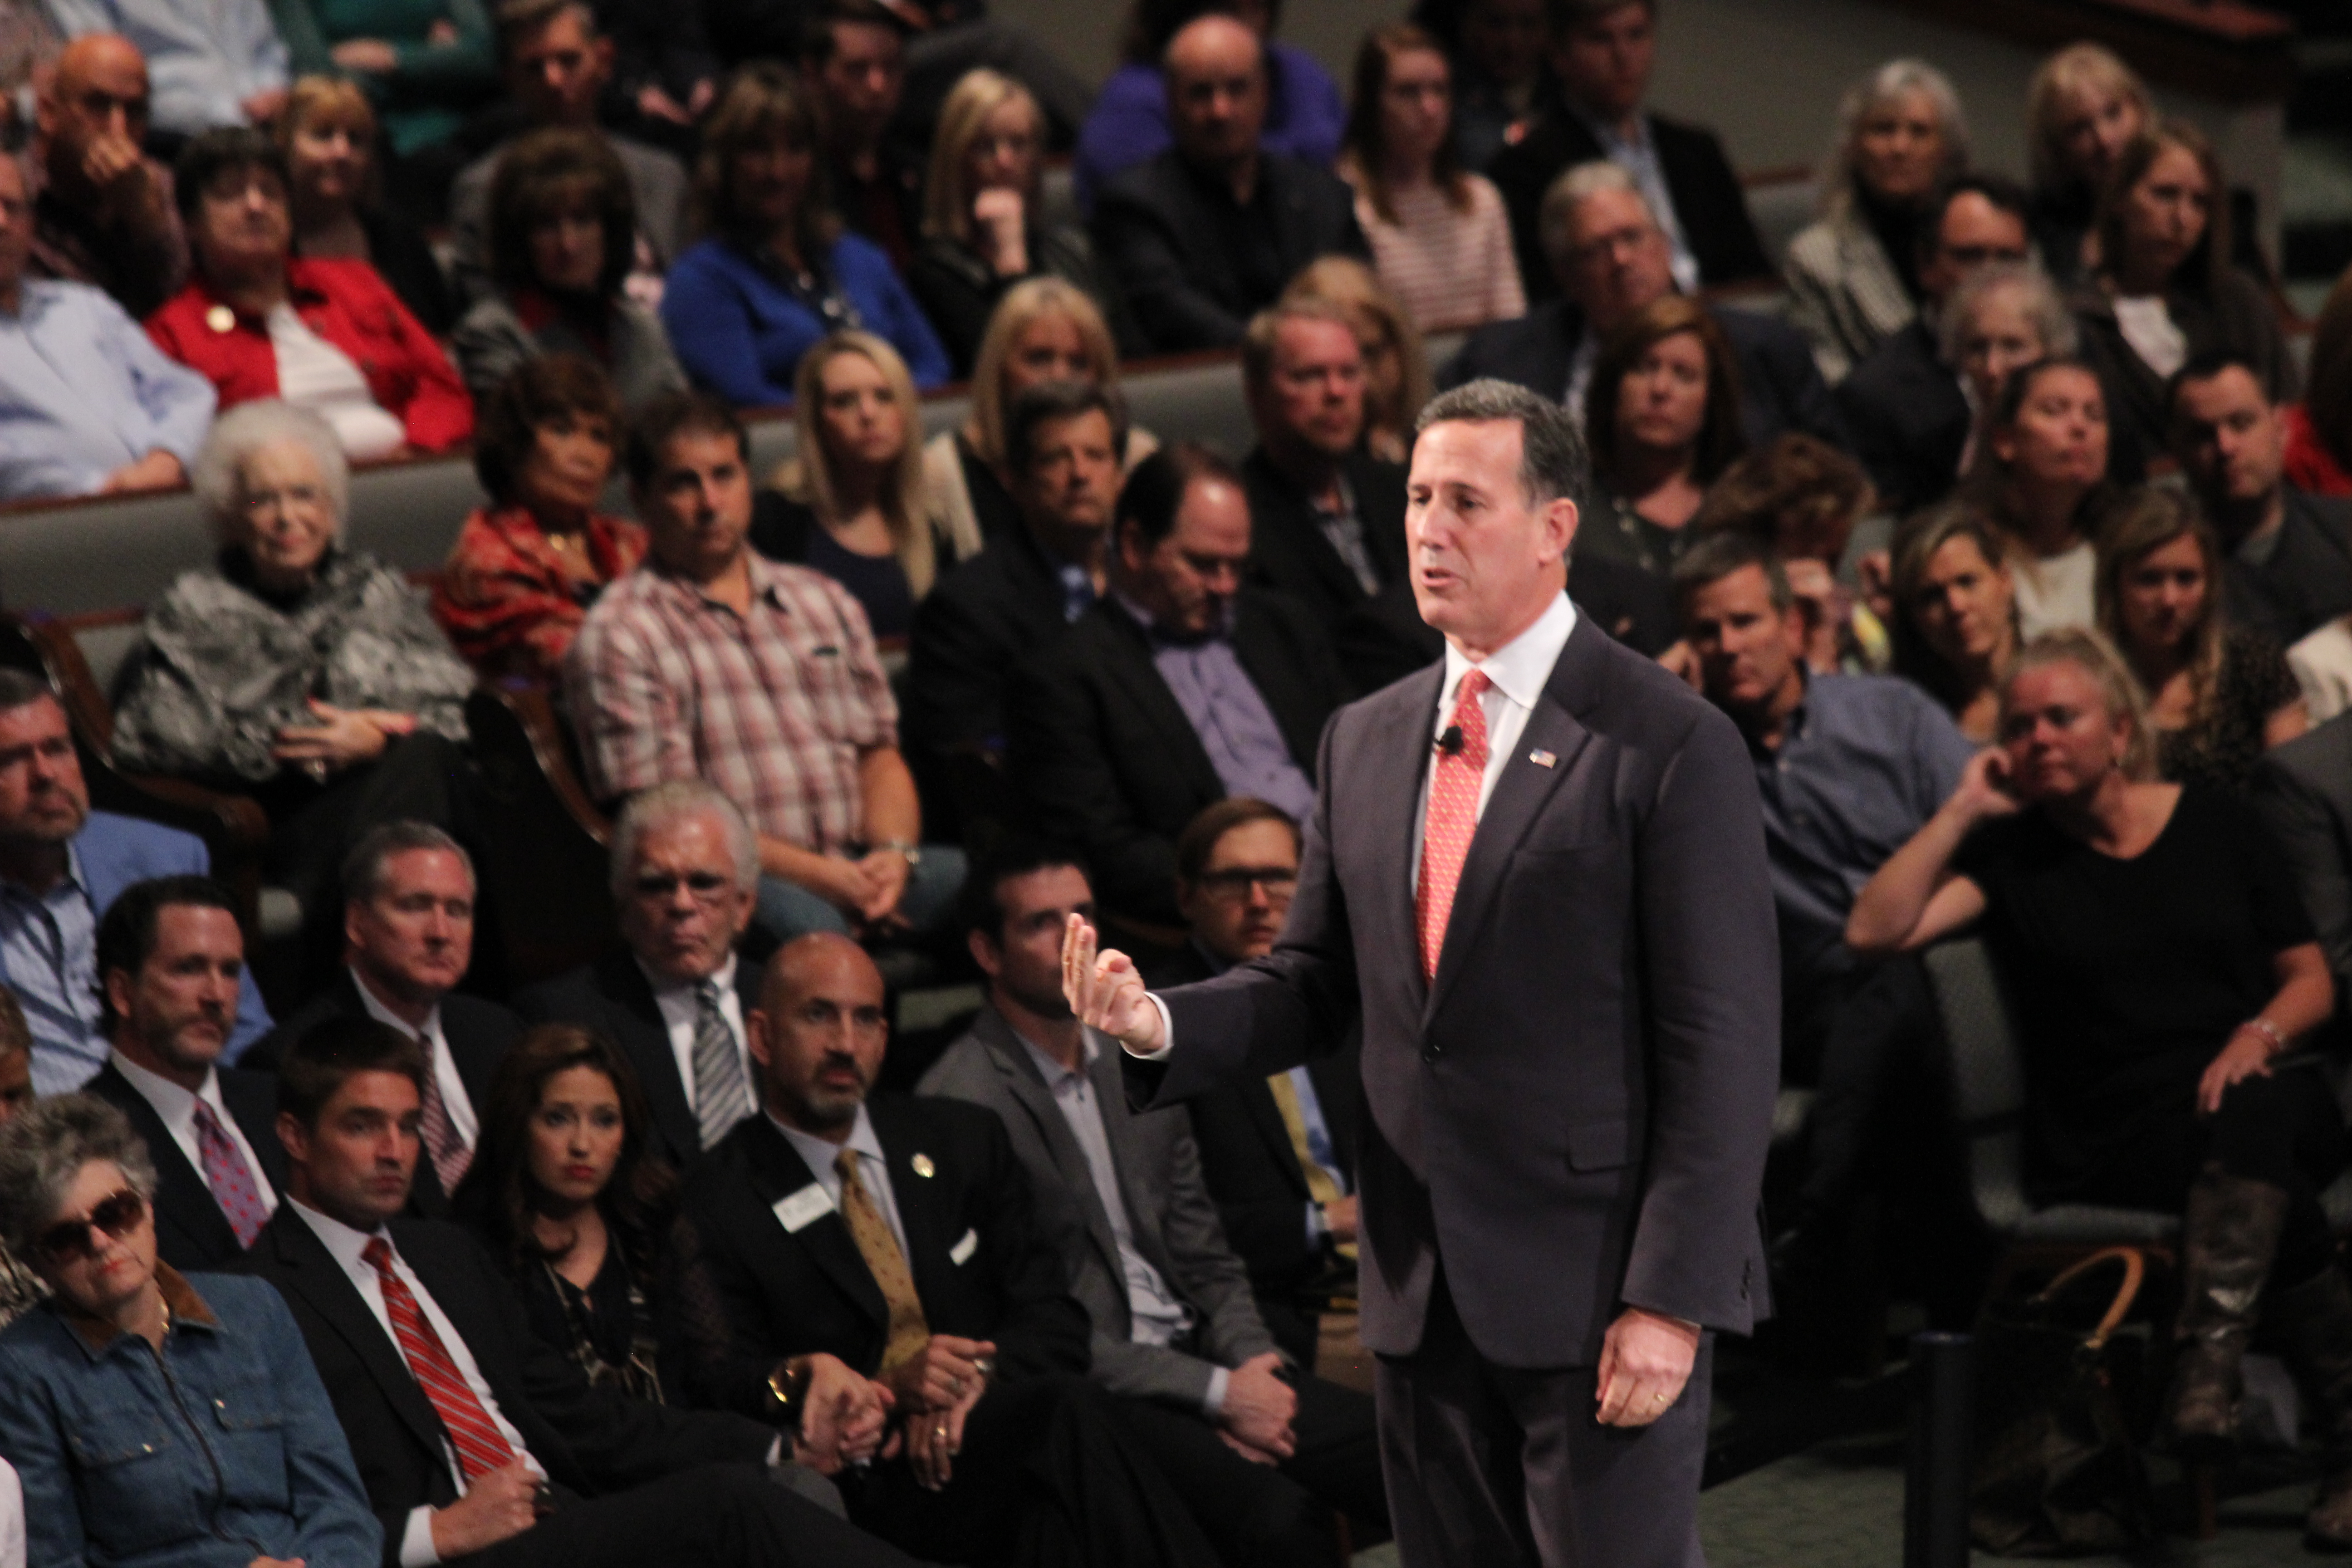 GOP candidates attend church forum in Plano